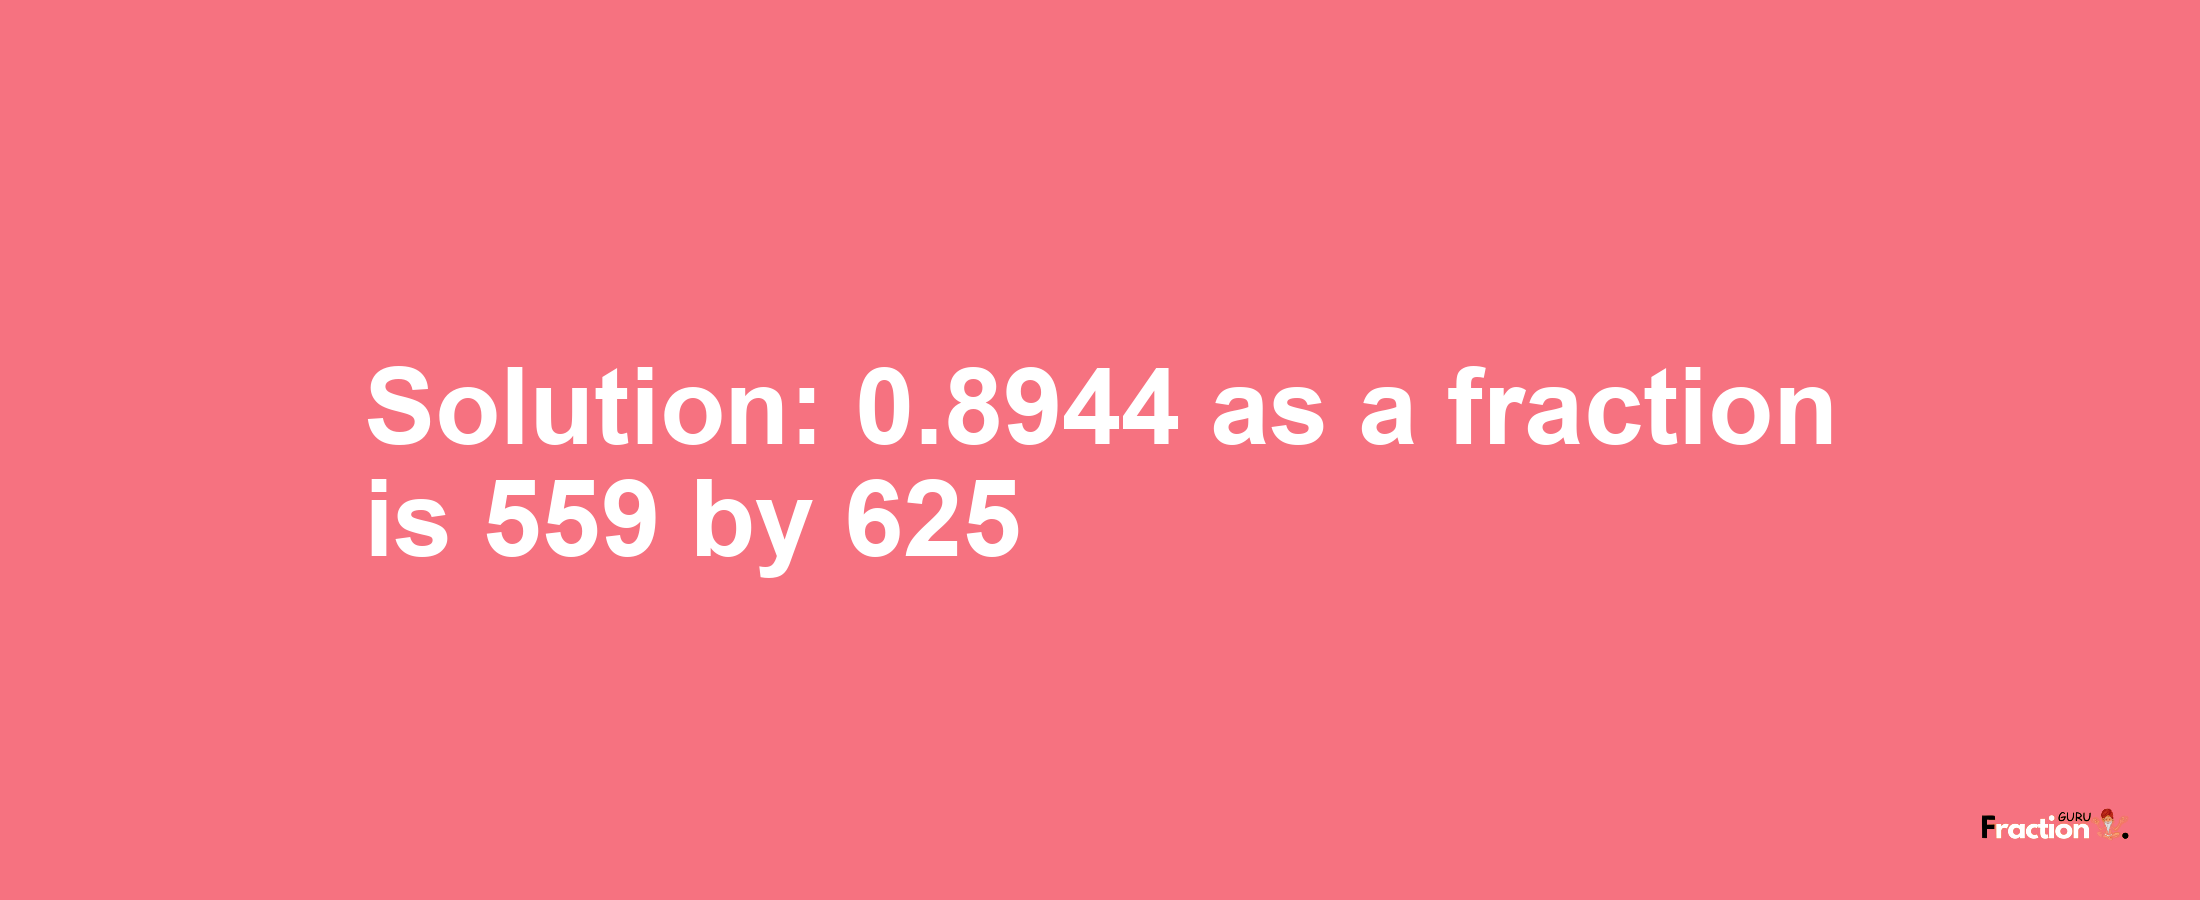 Solution:0.8944 as a fraction is 559/625